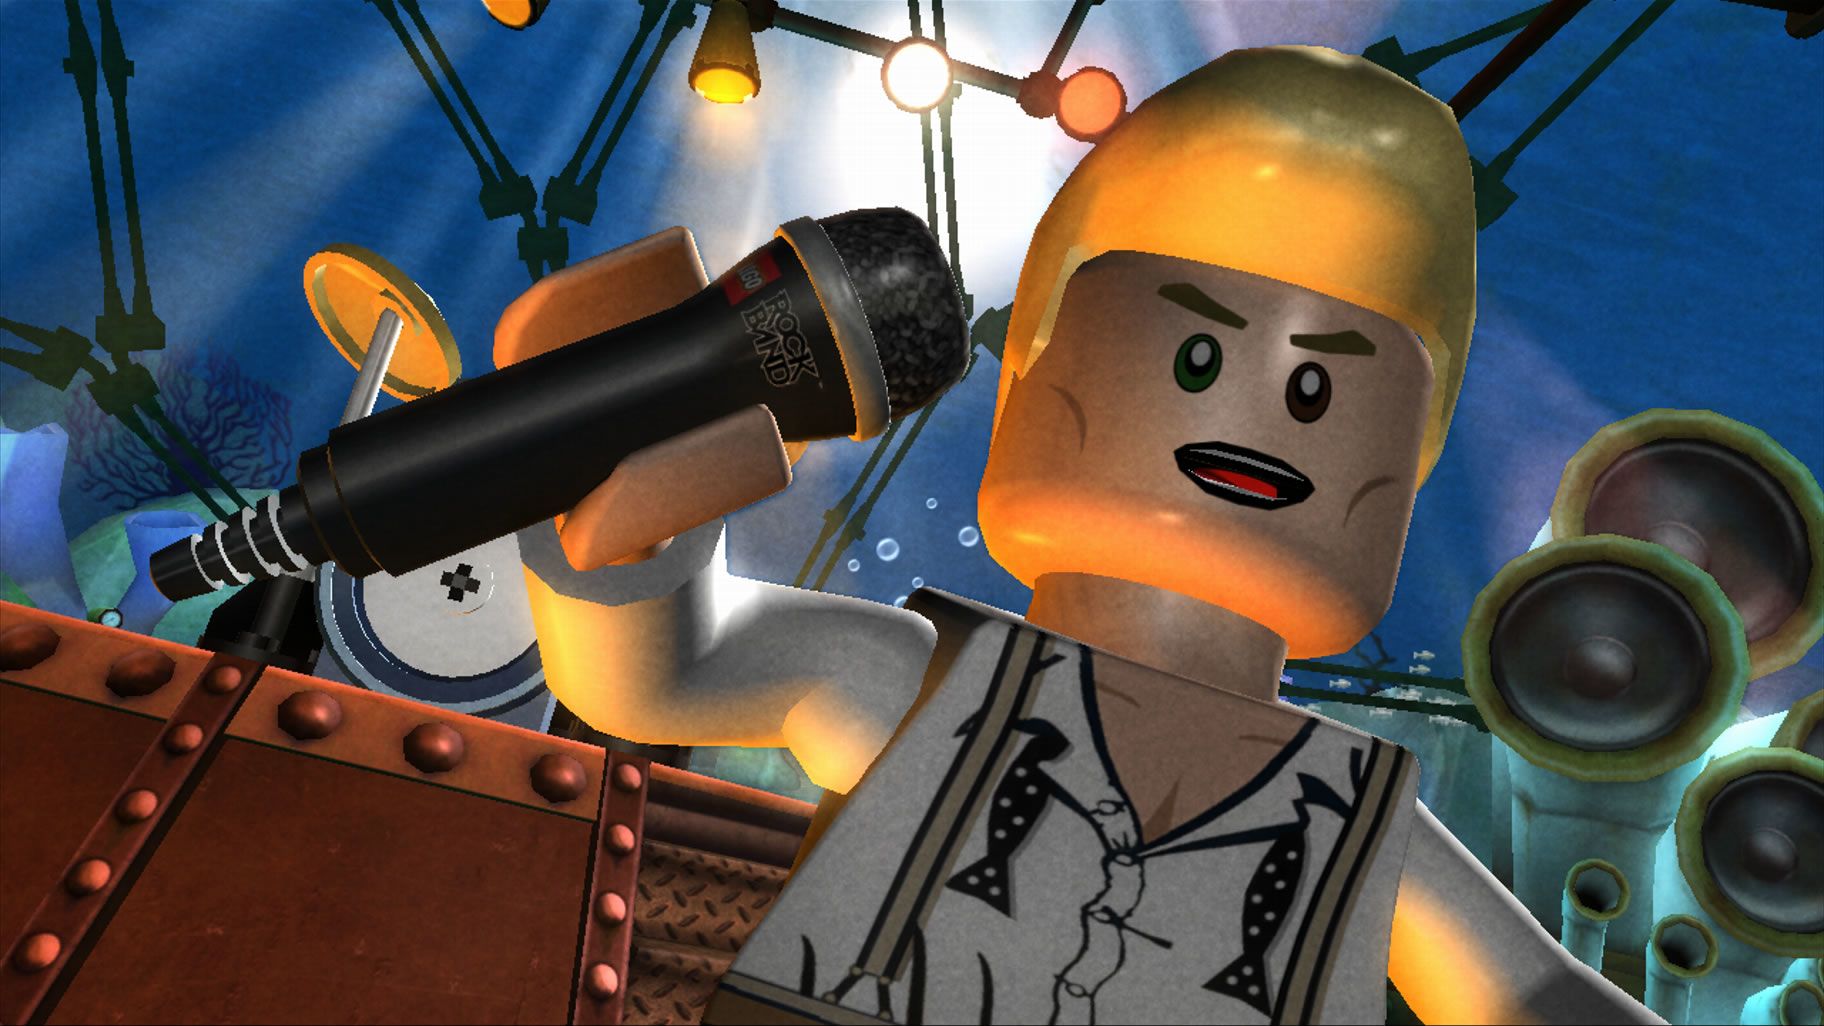 Lego Rock Band - Bowie (2)